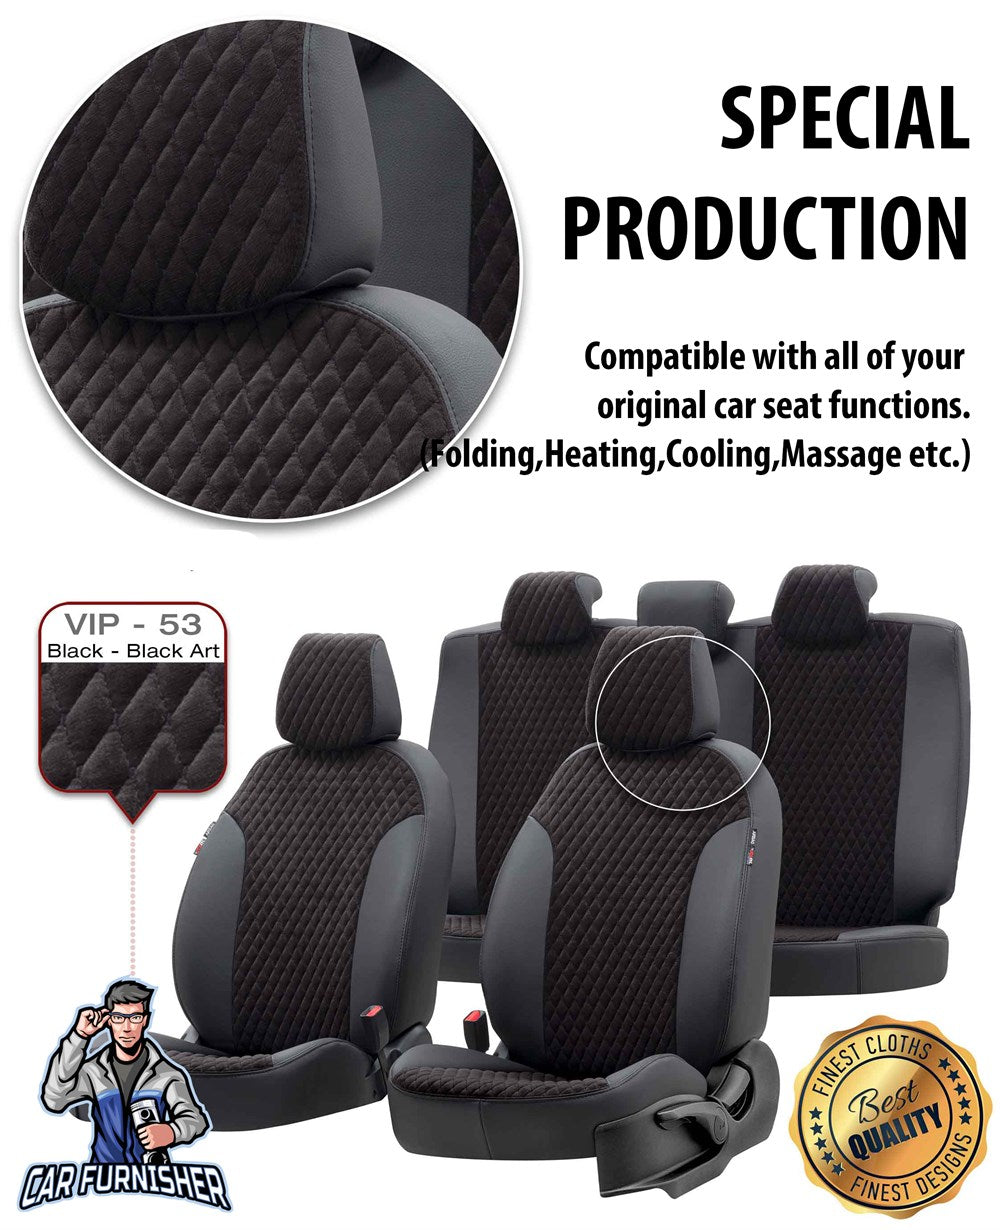 Citroen C5 Car Seat Covers 2001-2017 MK1-2-3 Amsterdam Feather Smoked Black Full Set (5 Seats + Handrest) Leather & Foal Feather